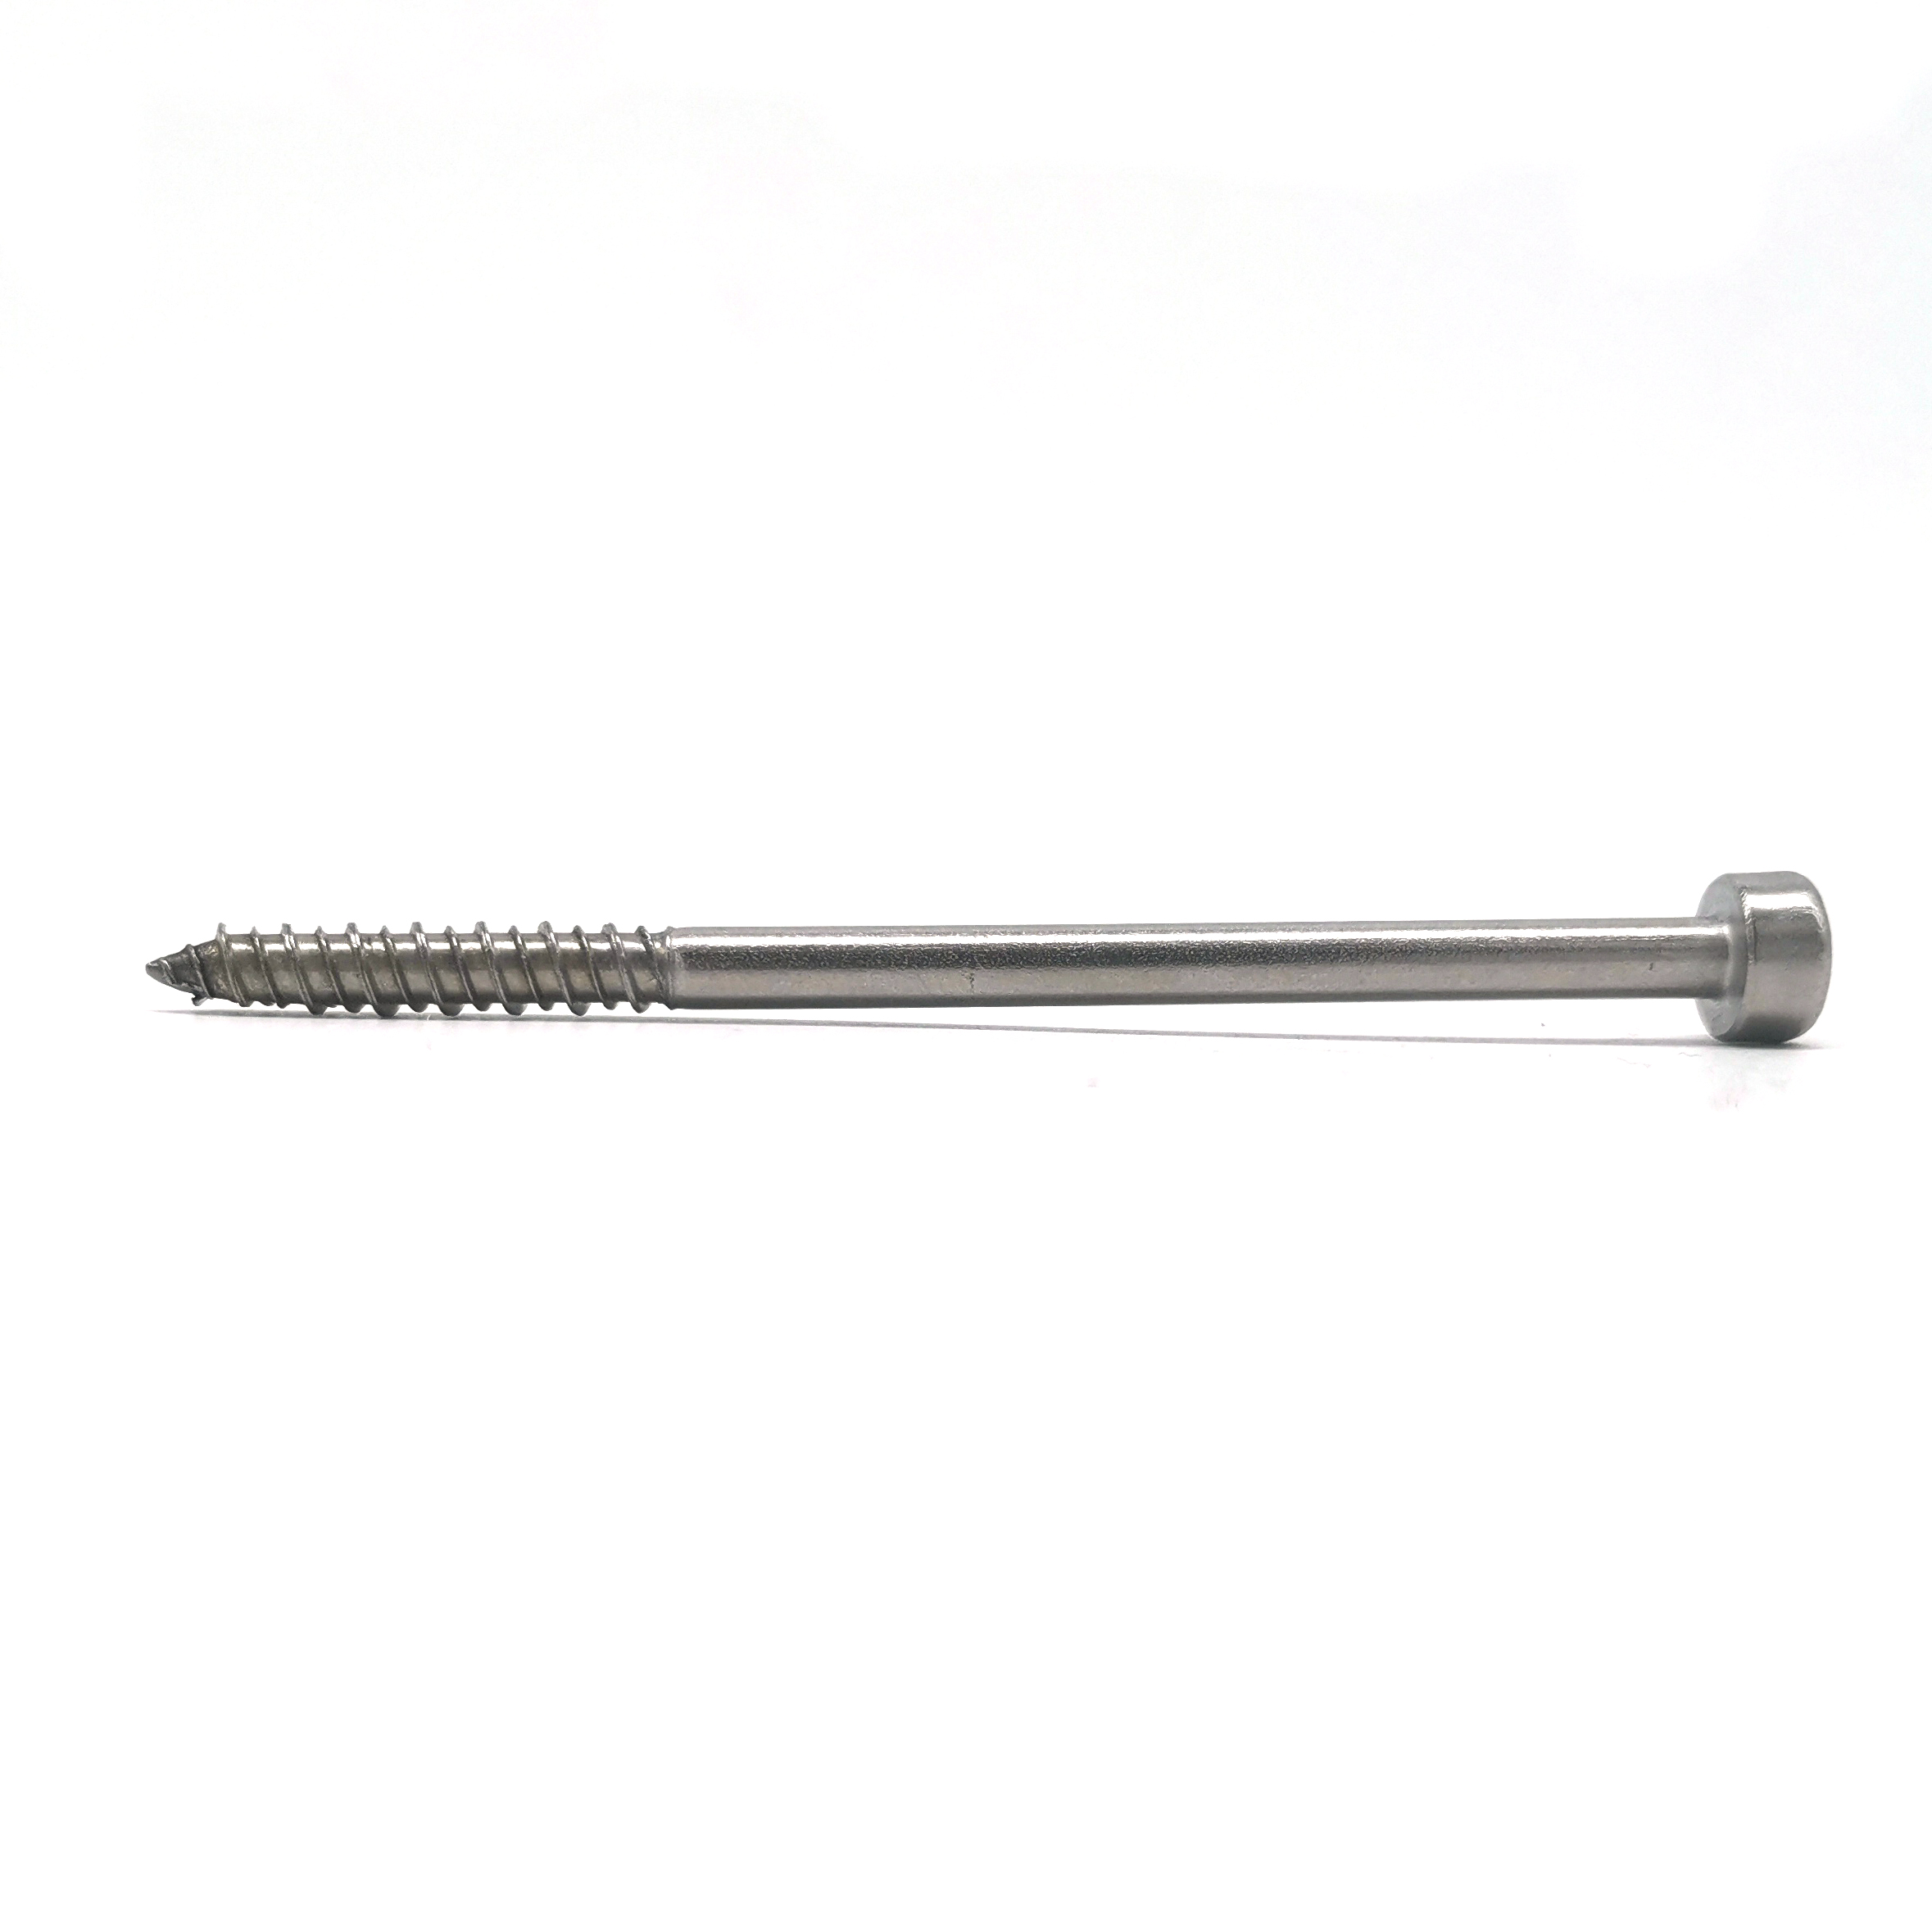 Cross Pan Round Head Self Tapping Stainless Steel 304 316 100mm Wood Screw